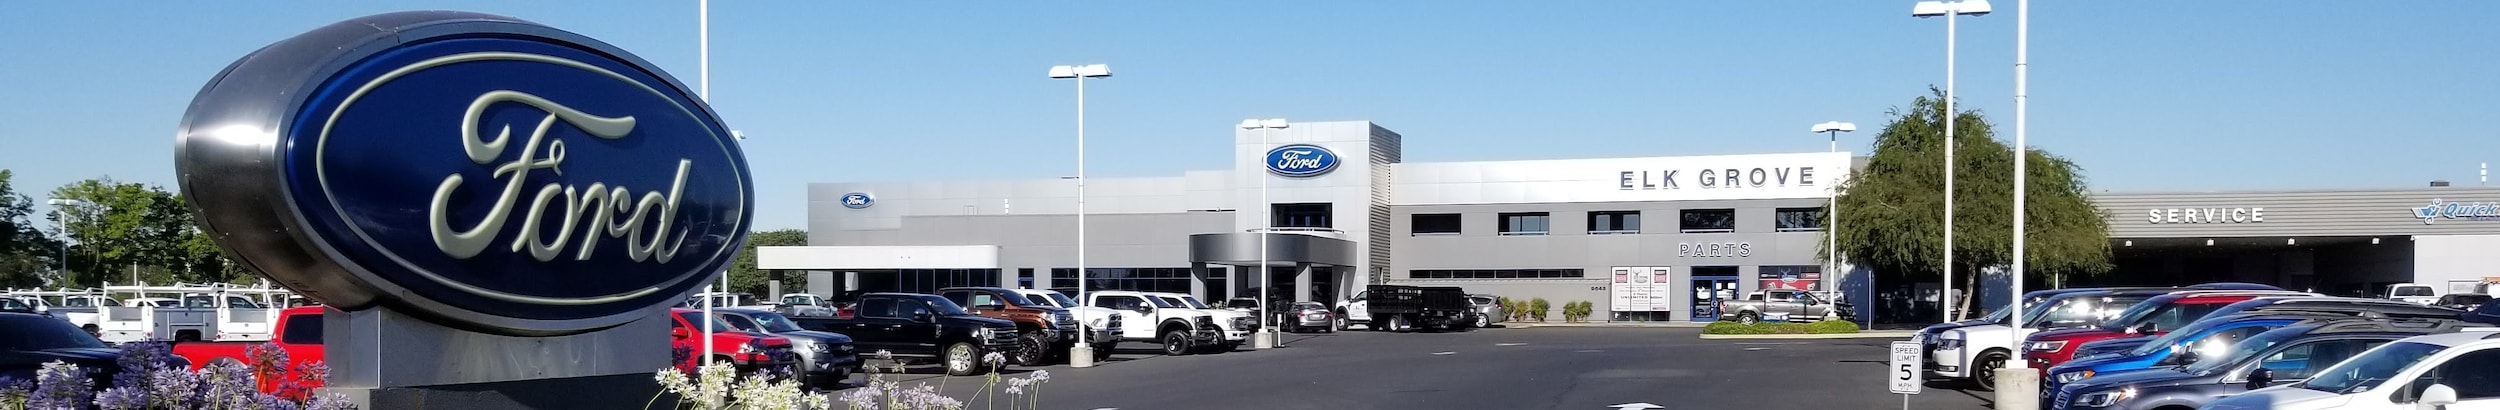 elk grove ford service department